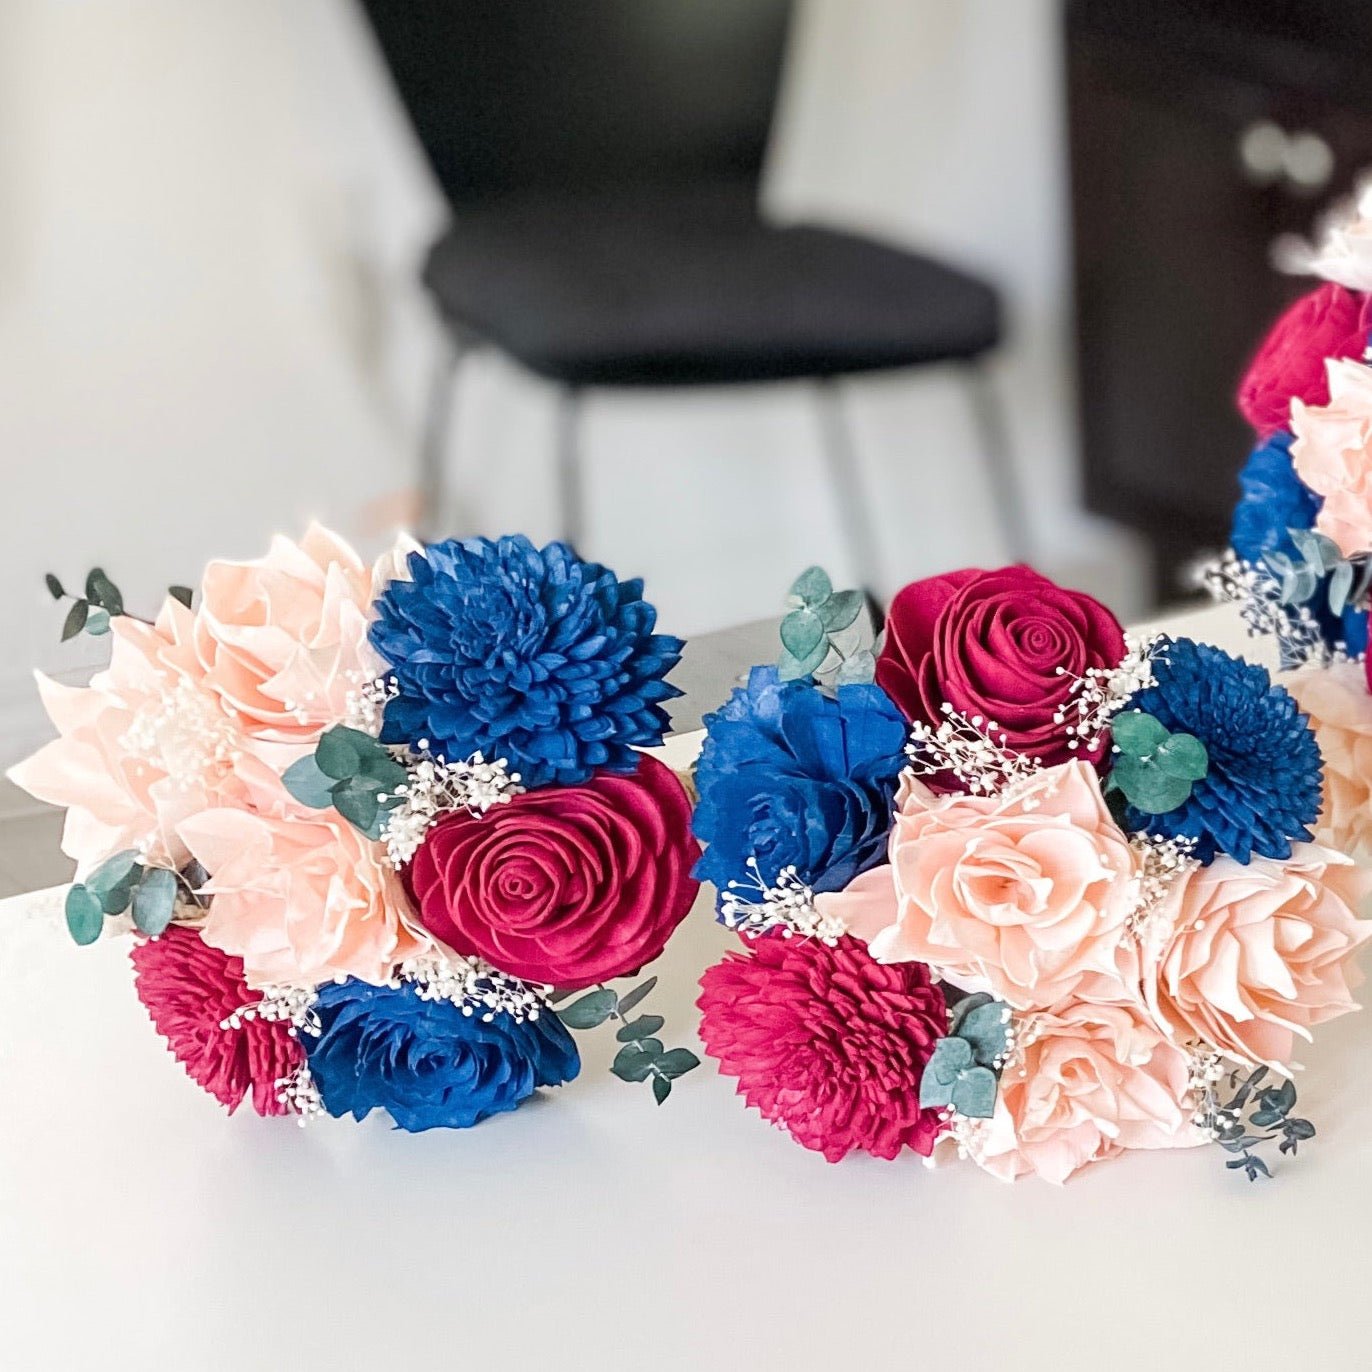 Blissful Union, A Bouquet of Navy Blue and Pink Roses For the Bride&#39;s Special Day - PapiroExtra Large 12&quot; Bride